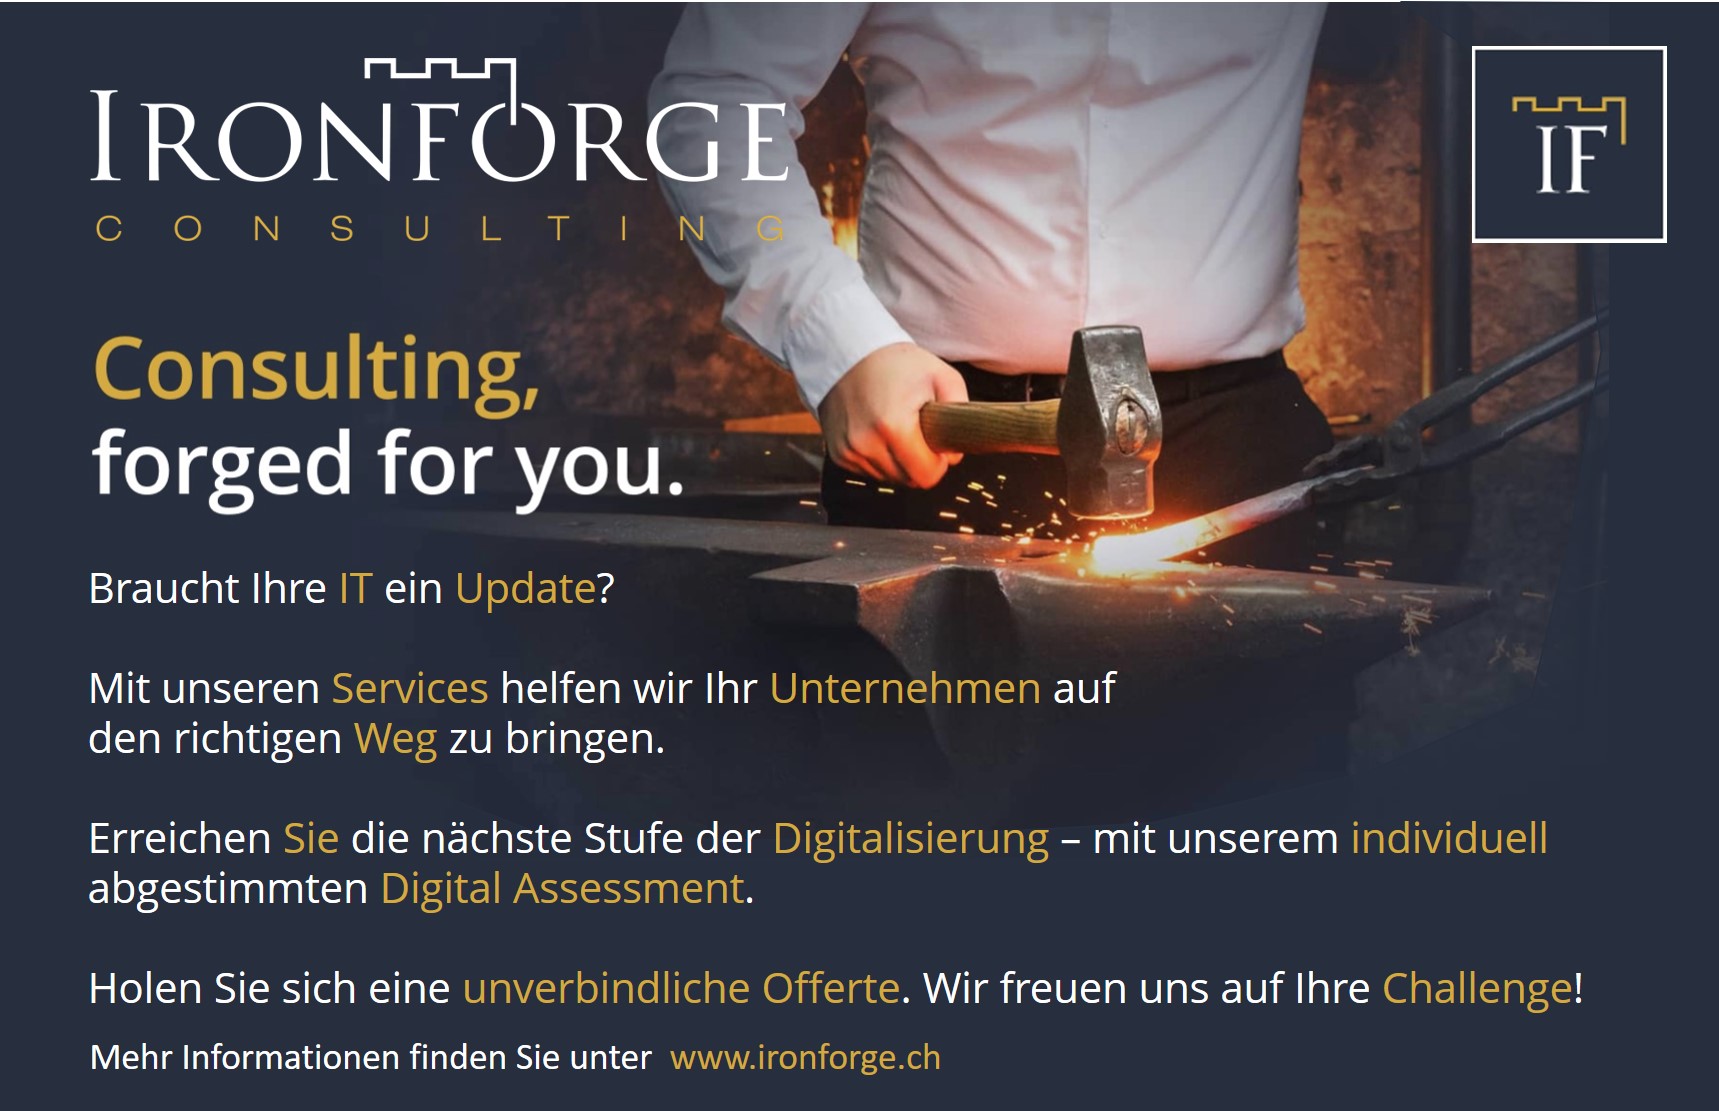 Ironforge Consulting forged for you.